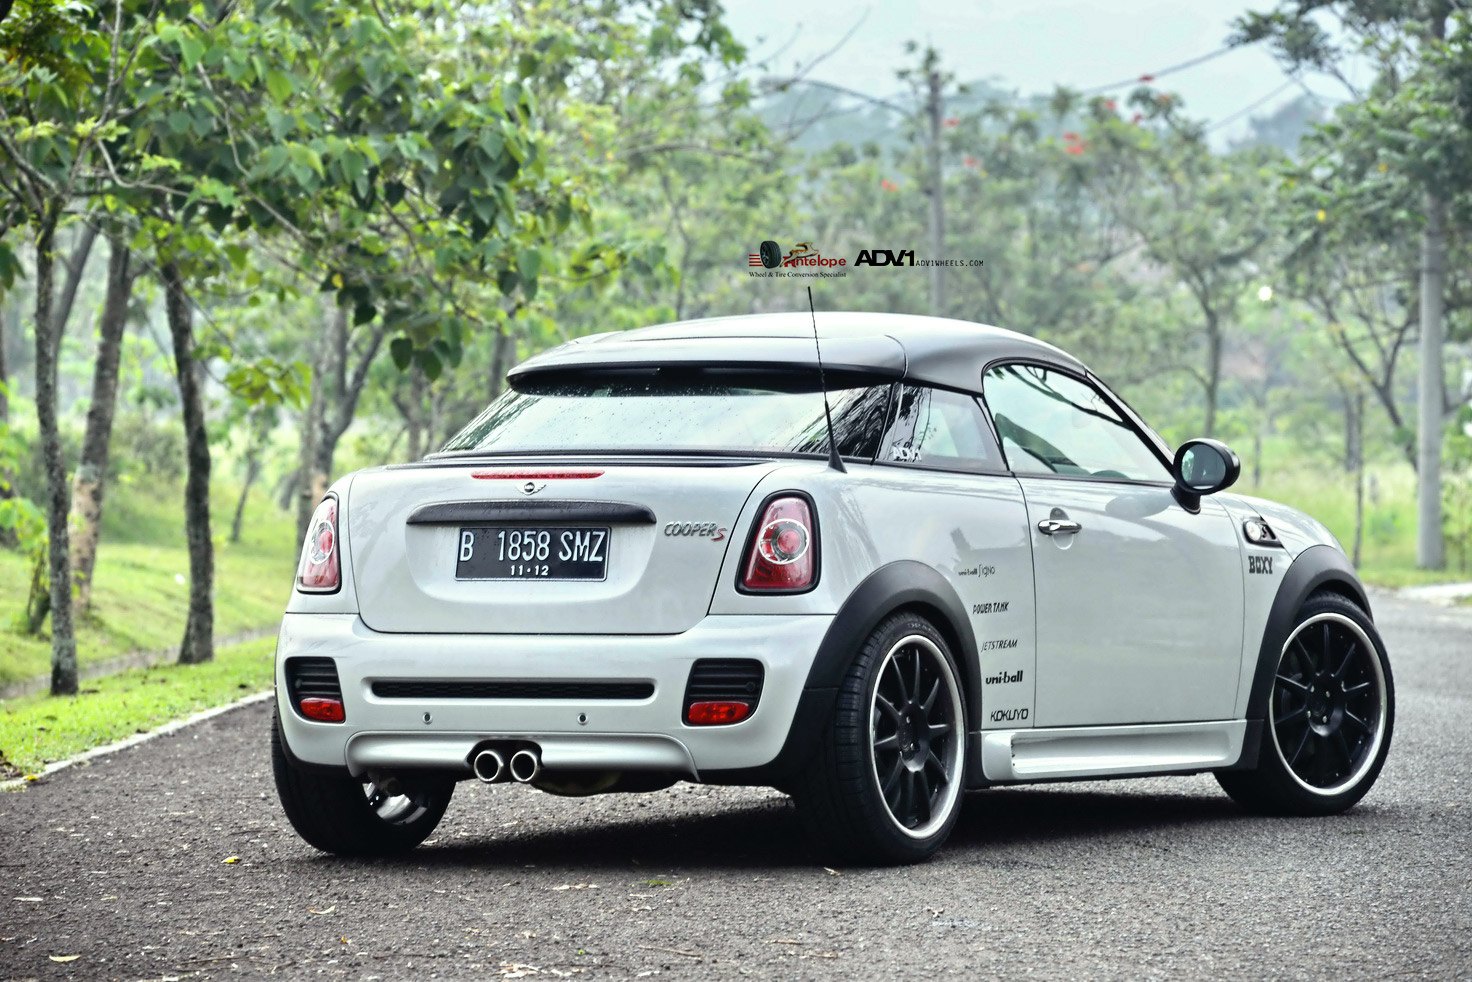 Aftermarket Rear Diffuser on White Mini Cooper S - Photo by ADV.1